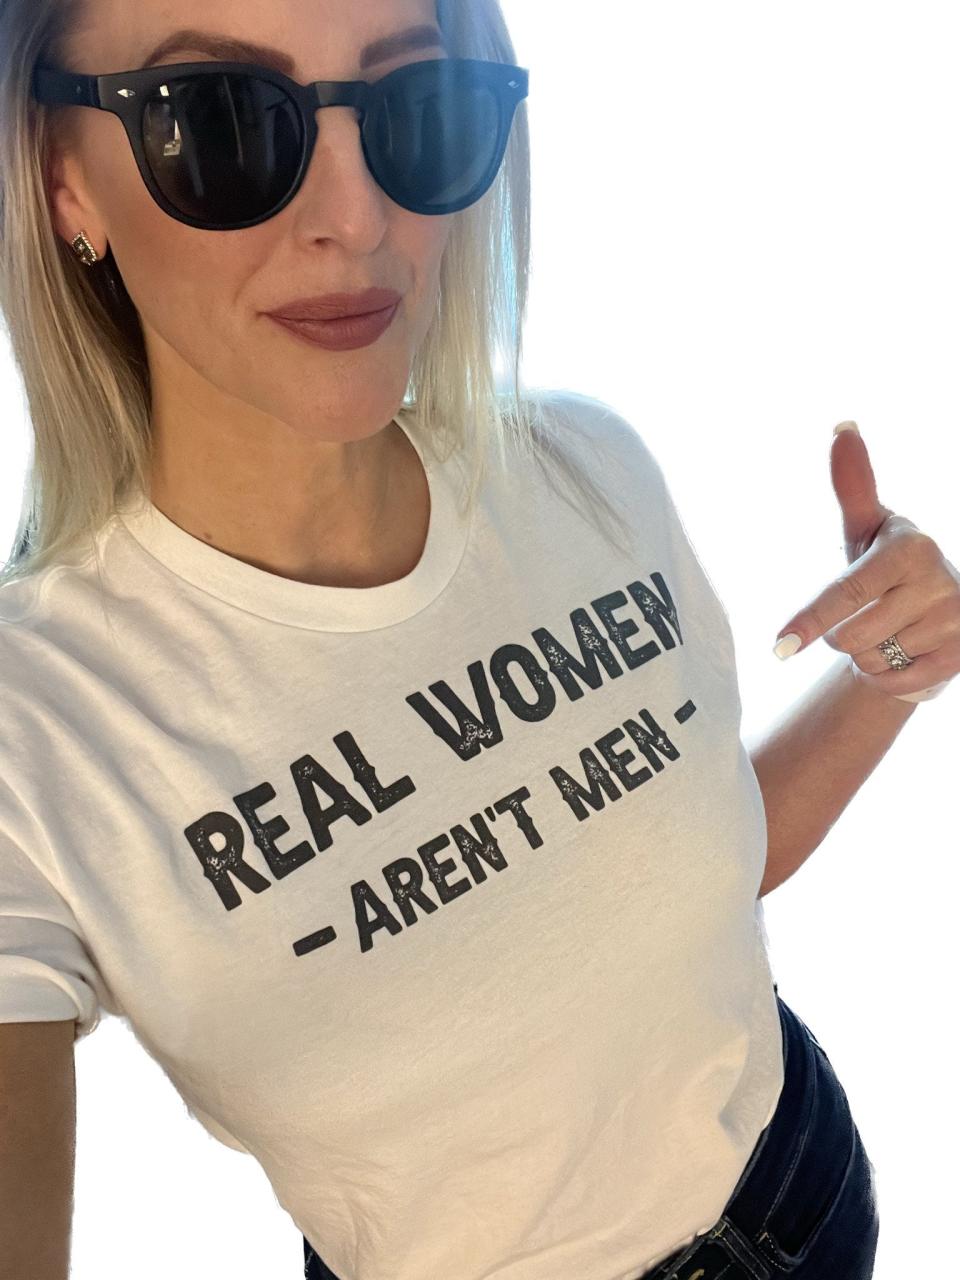 Sarasota School Board Chairwoman Bridget Ziegler points to a shirt that reads "real women aren't men", which she posted to her Twitter account April 2.